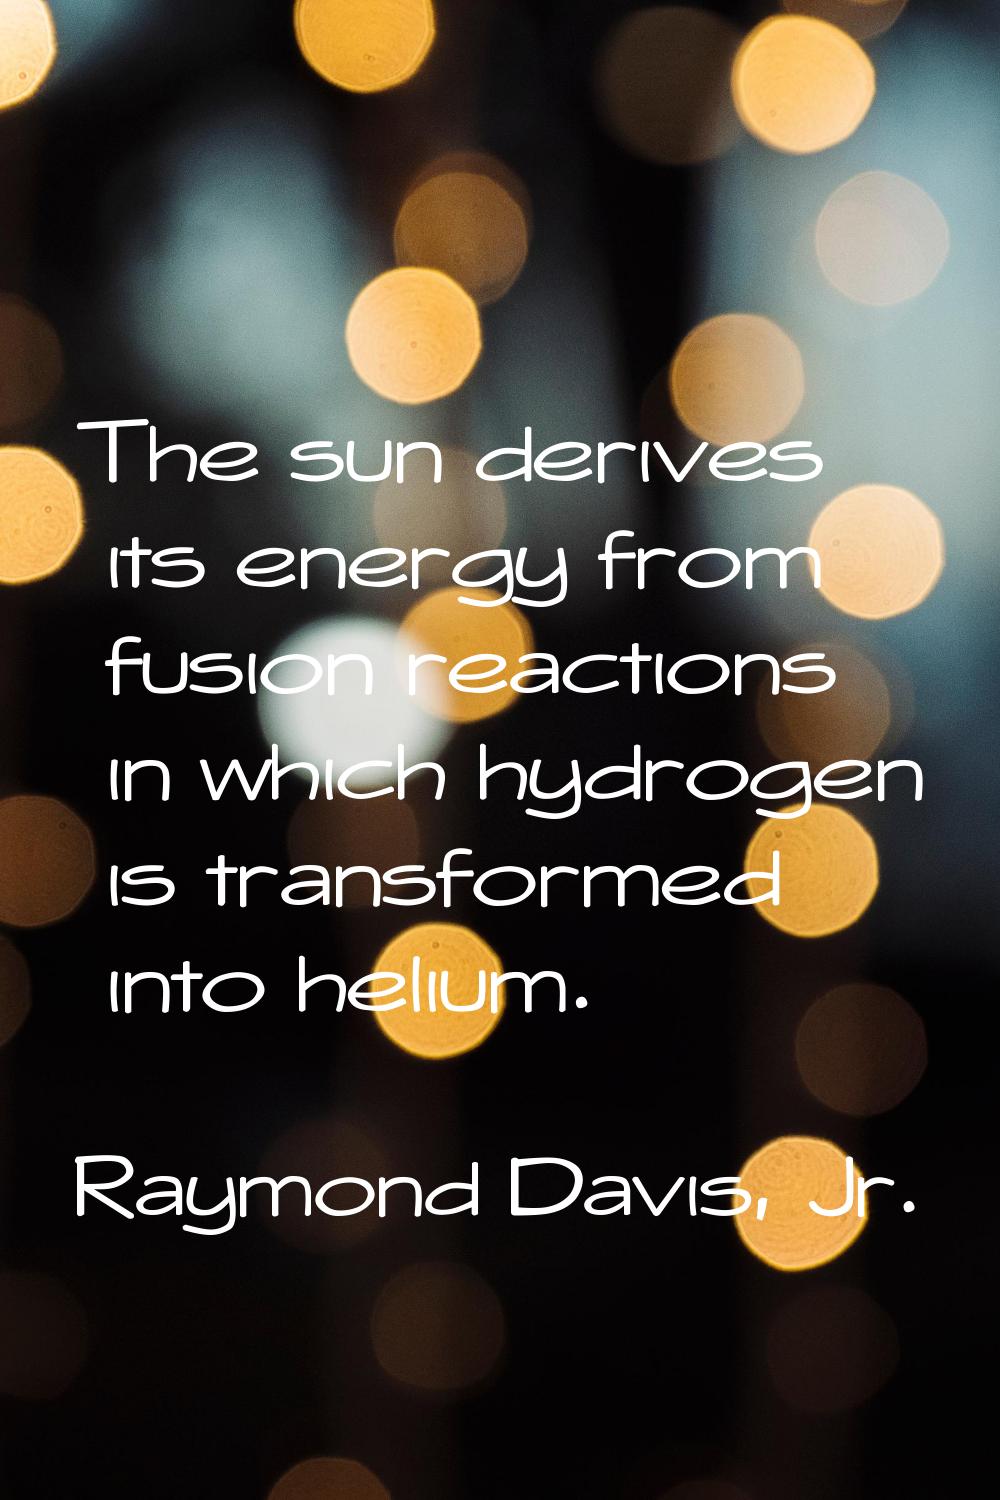 The sun derives its energy from fusion reactions in which hydrogen is transformed into helium.